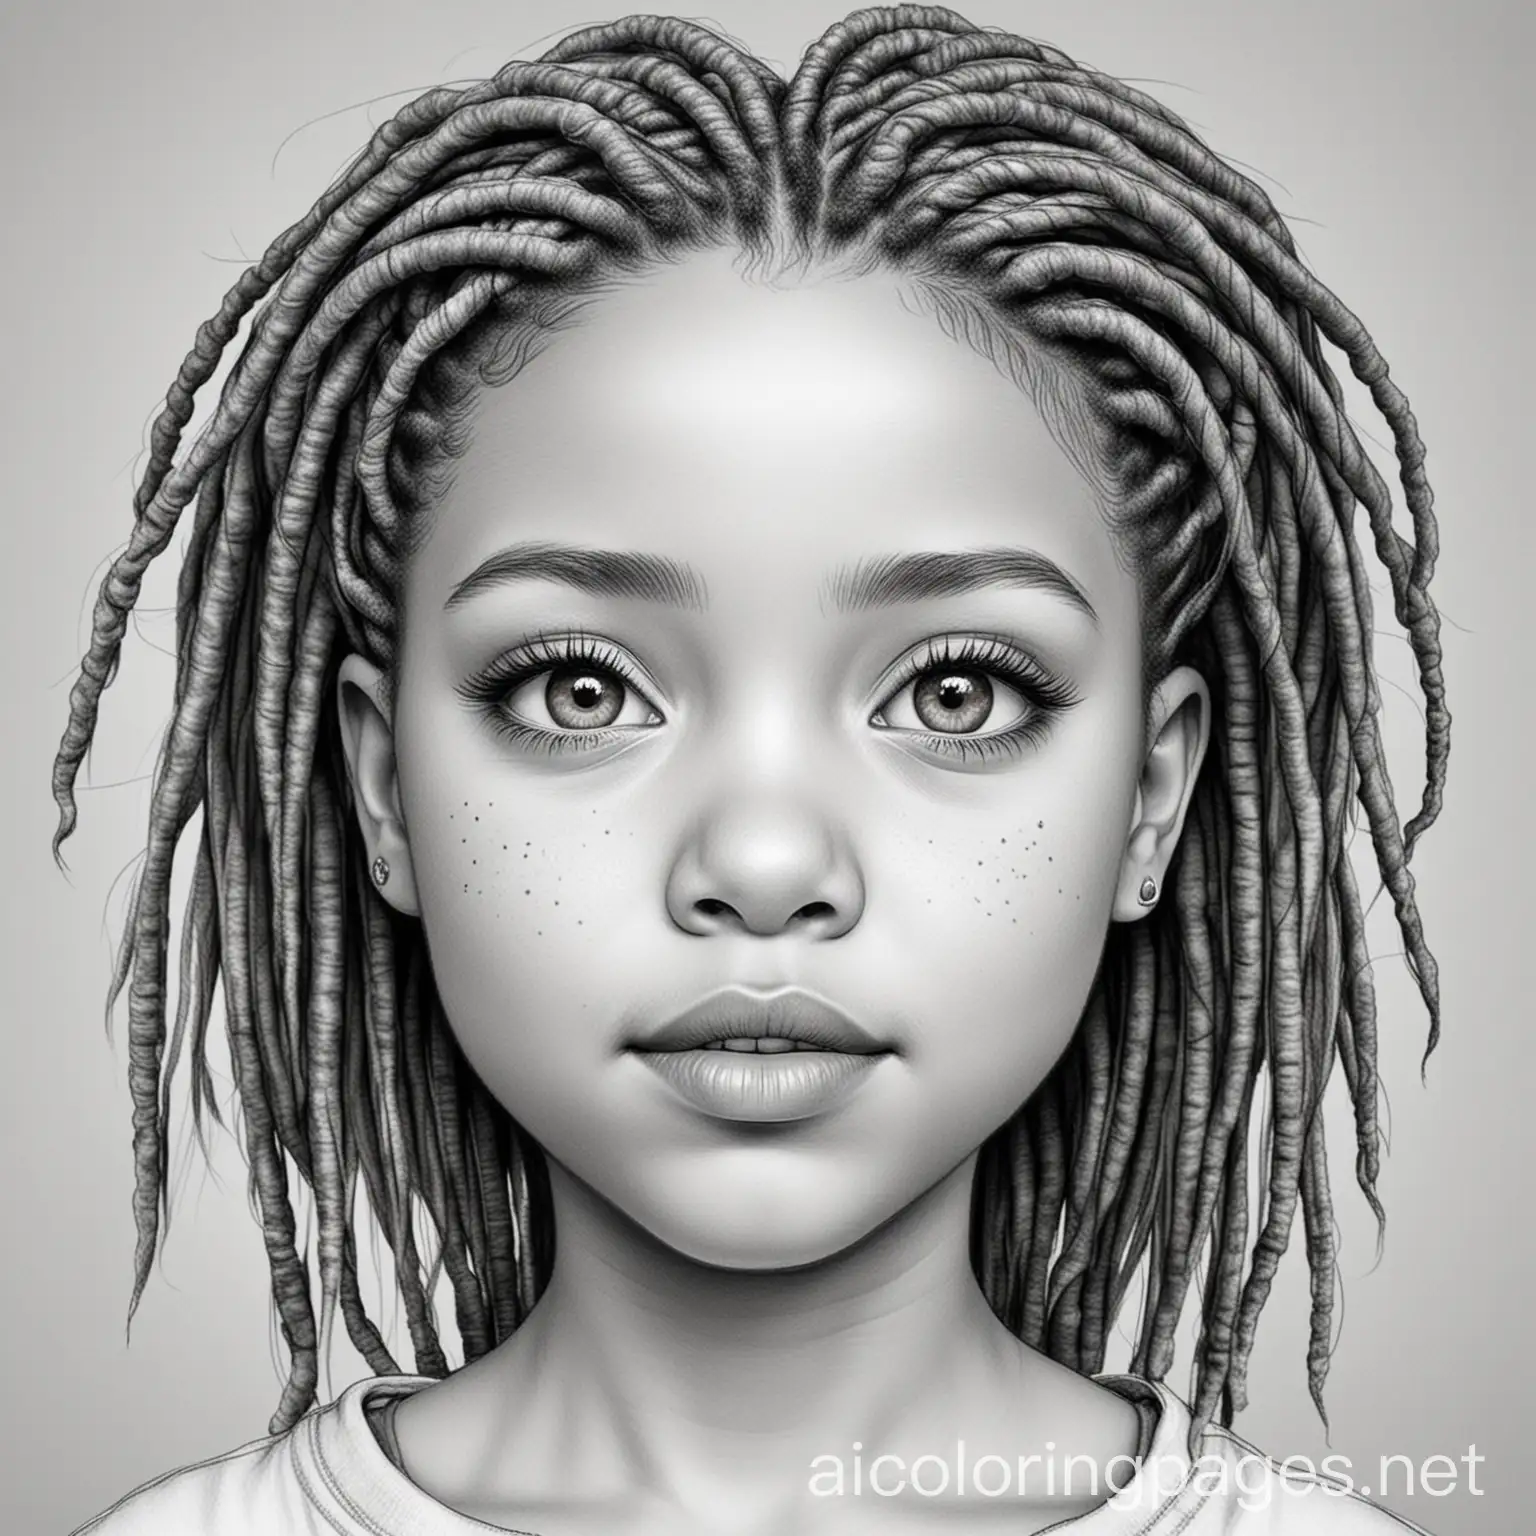 A black female with thin dreadlocks, semi thick eyebrows, face is a little fat, brown eyes, a baby face, she could pass for being in her 20s staying in a dystopian future where advanced technology coexists with societal decay, often focusing on themes of corporate power, urbanization, and human augmentation, black and white only, coloring page, no gray shading, coloring page, black and white, line art, white background, Simplicity, Ample White Space. The background of the coloring page is plain white to make it easy for young children to color within the lines. The outlines of all the subjects are easy to distinguish, making it simple for kids to color without too much difficulty